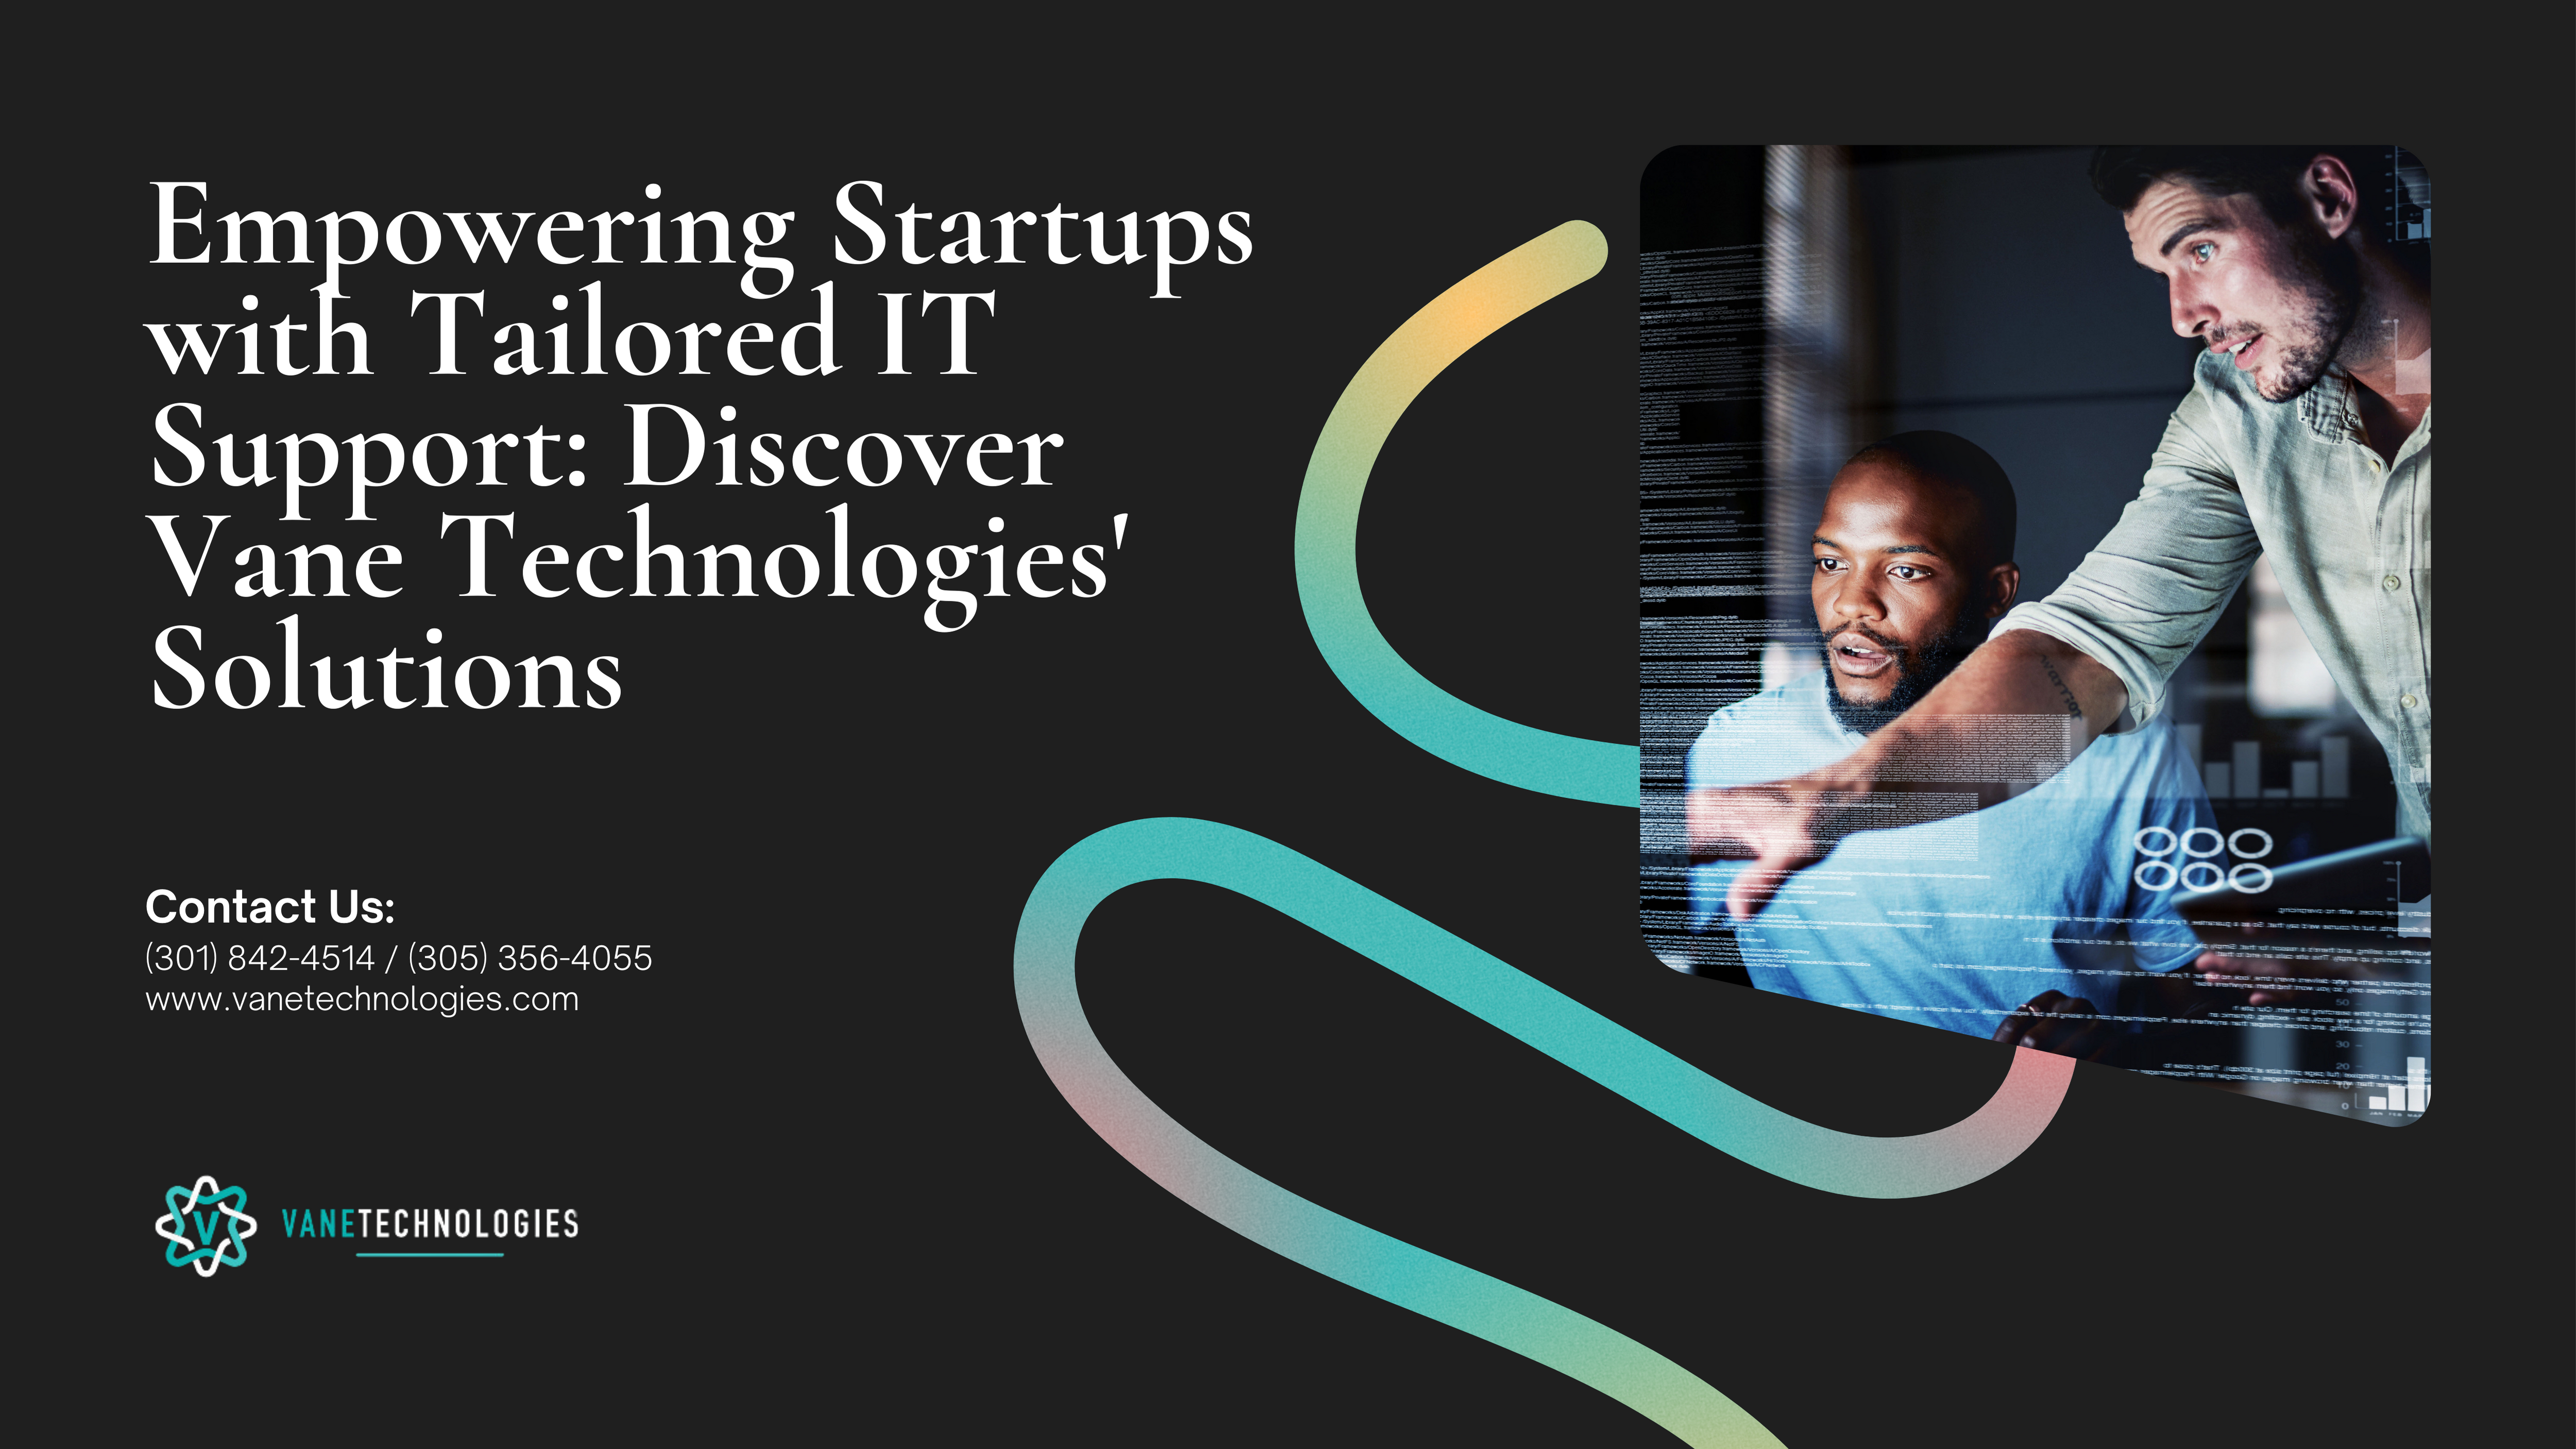 Empowering Startups with Tailored IT Support: Discover Vane Technologies' Solutions